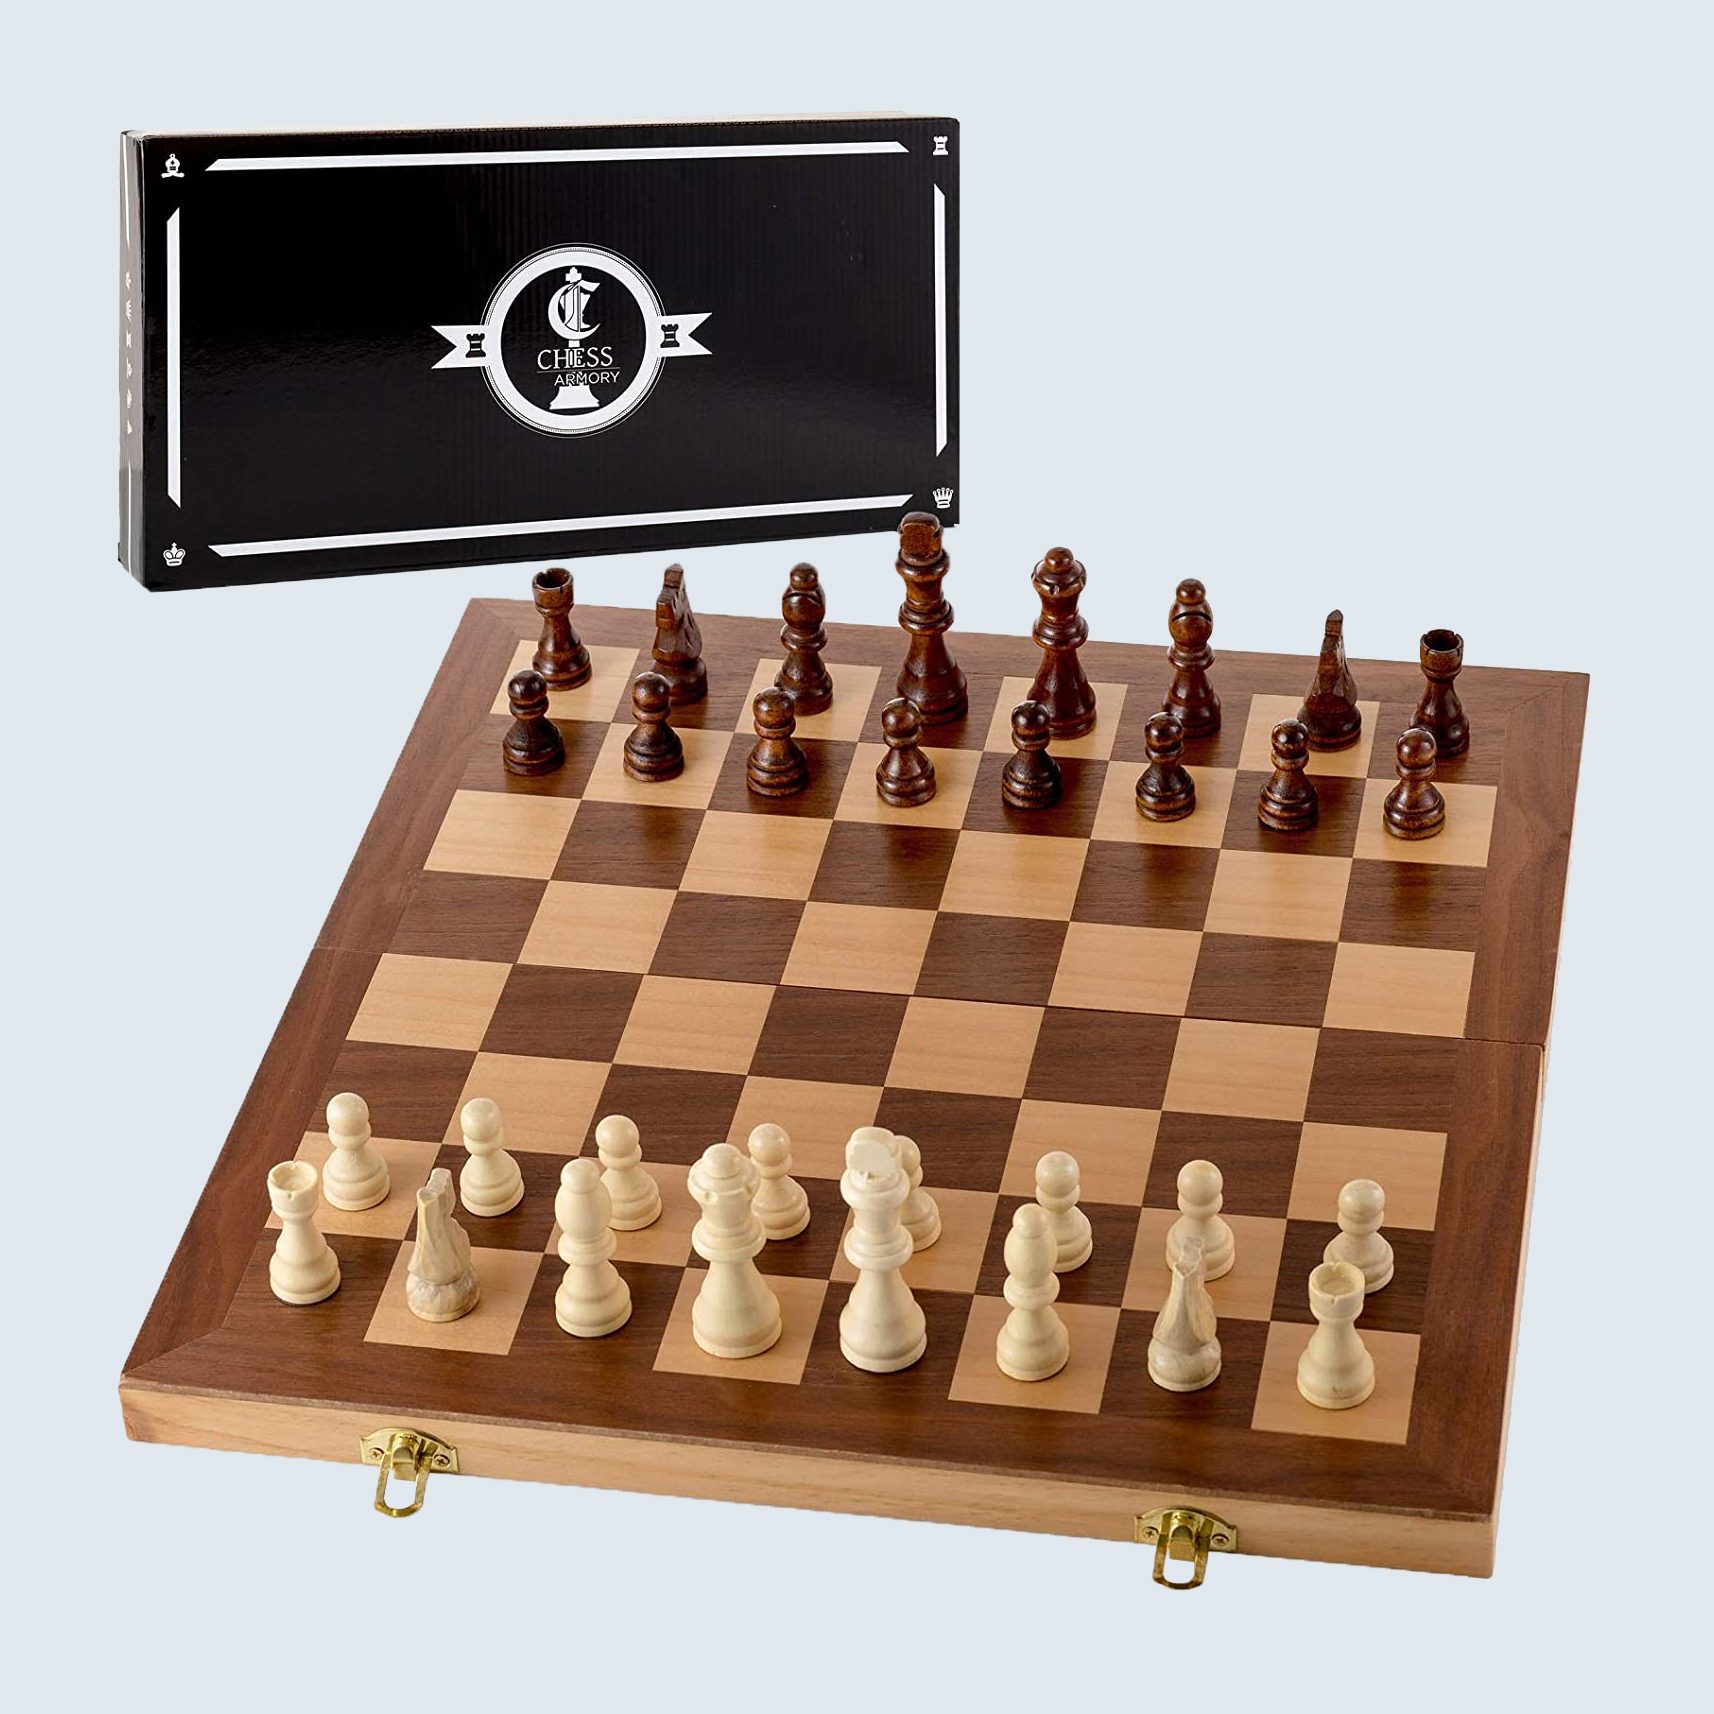 Chess game. Strategic desicion making. Plan and competition